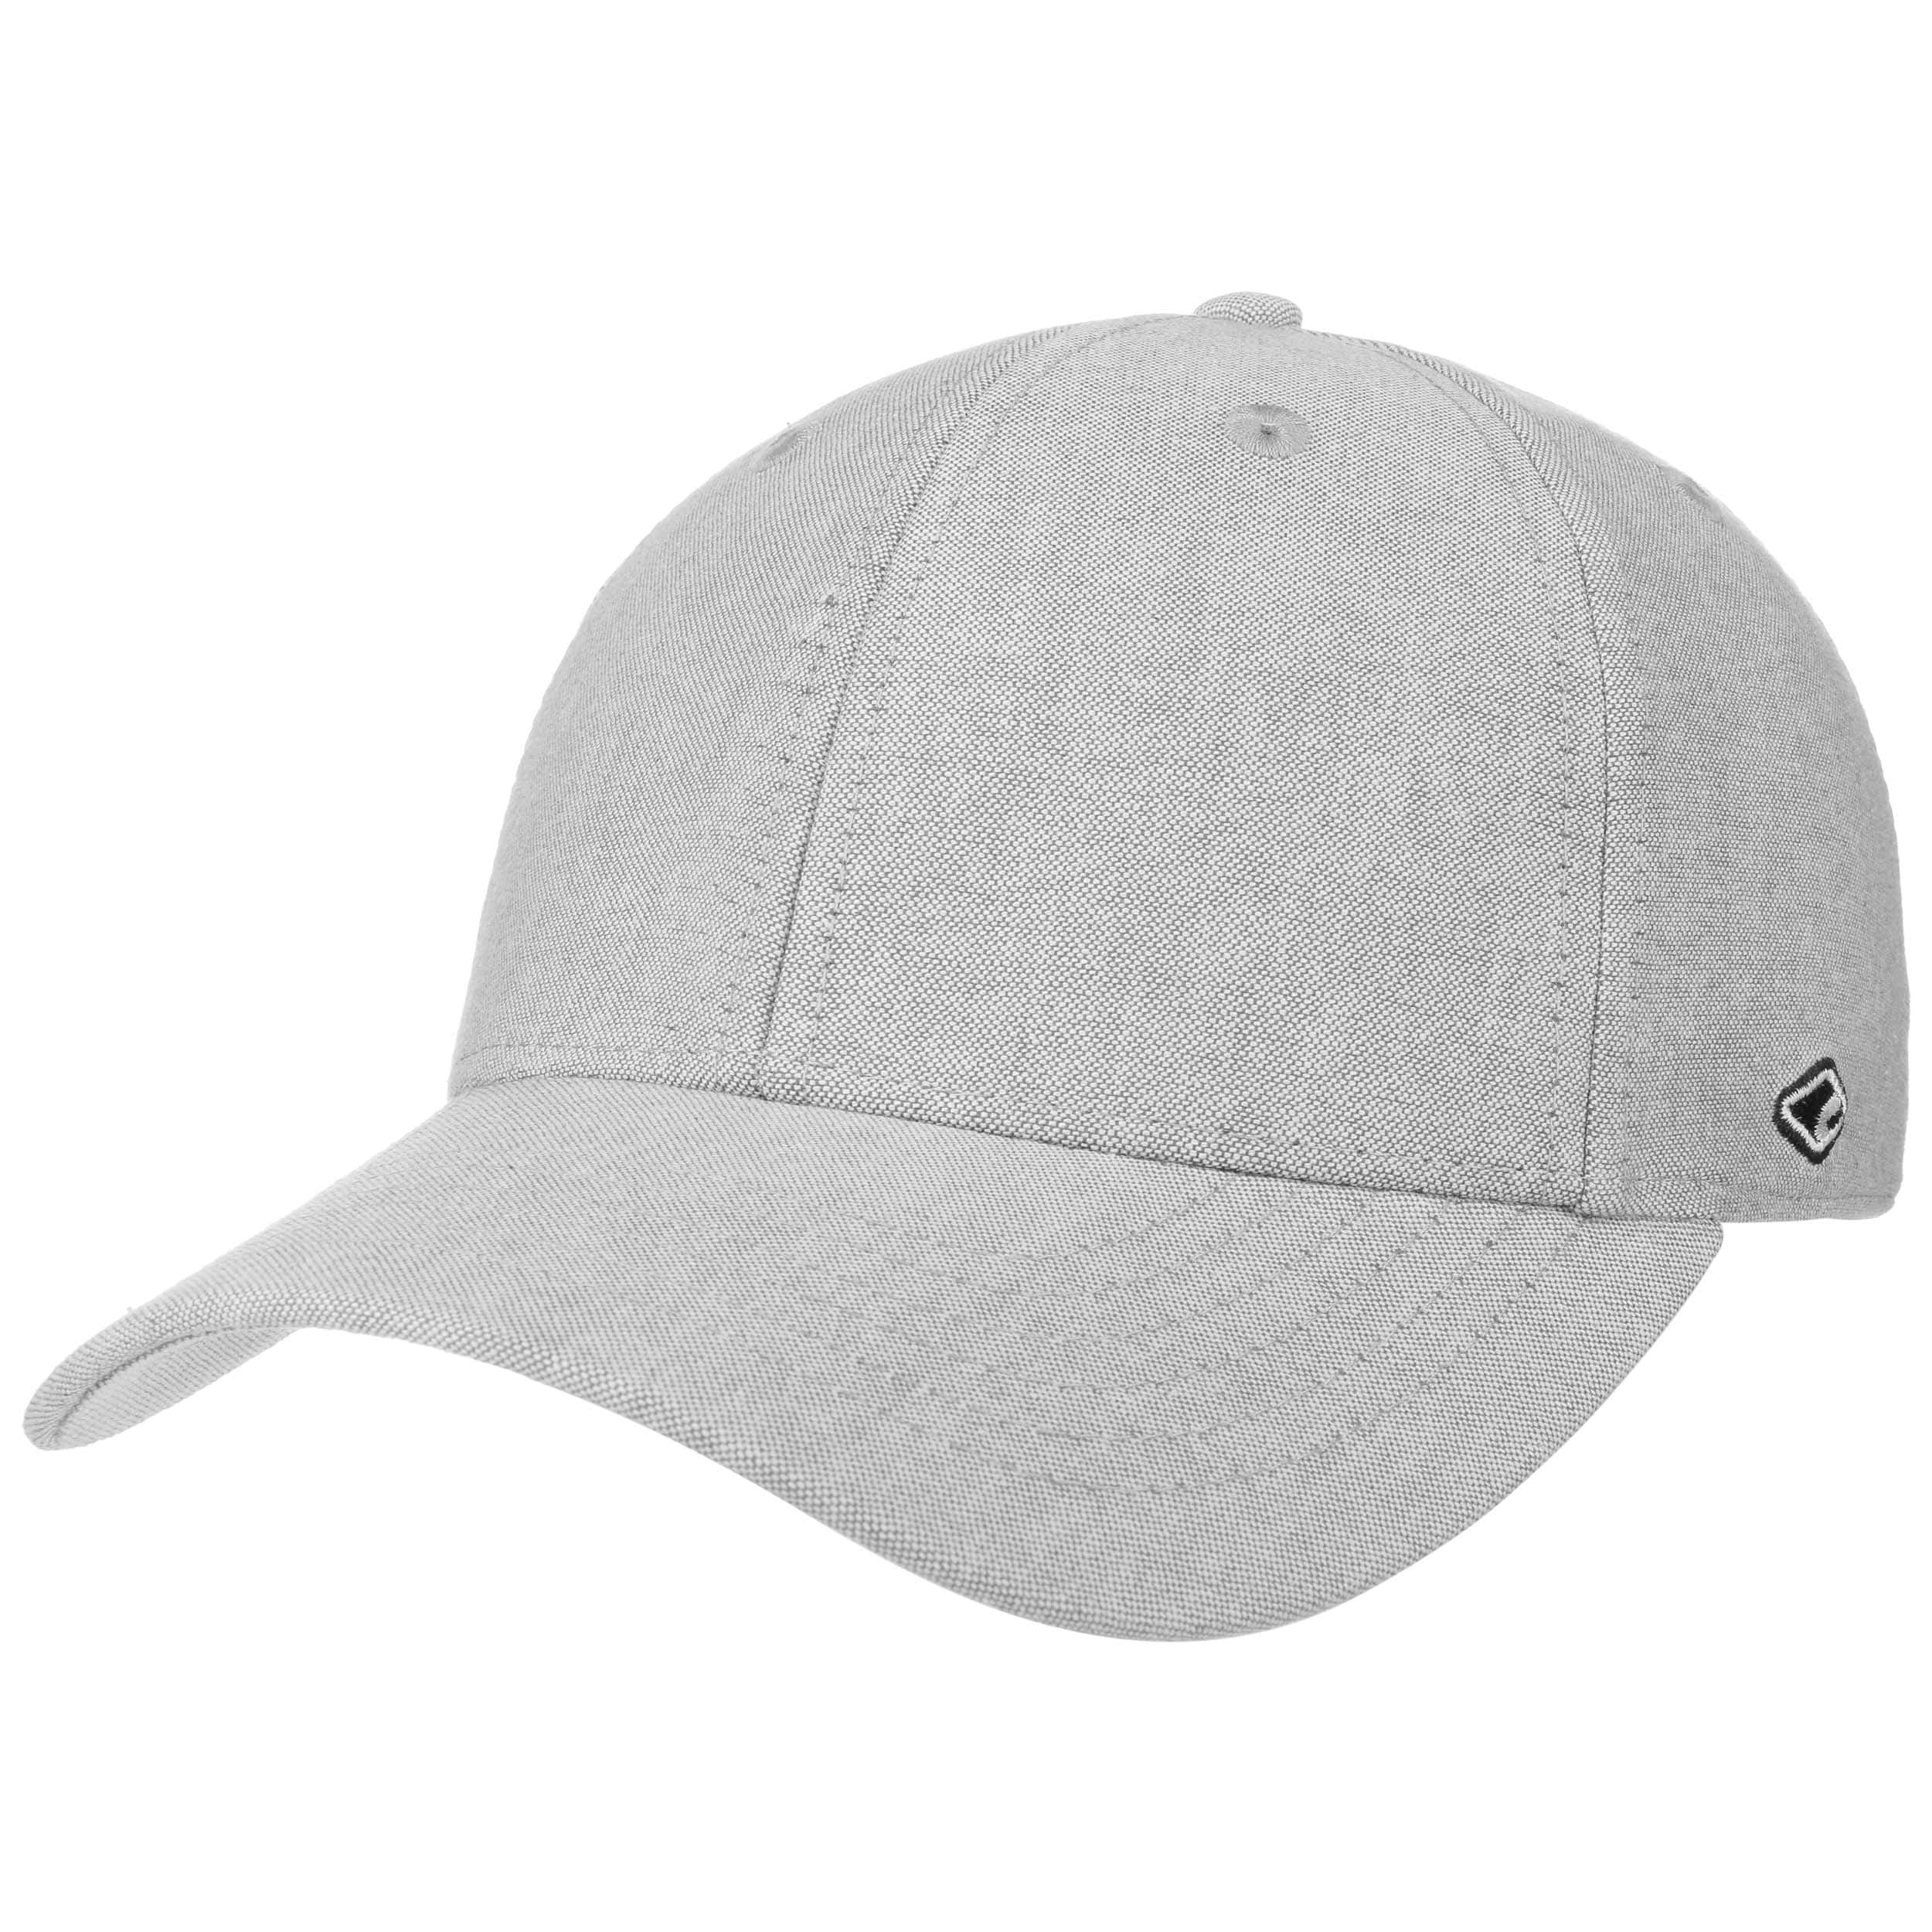 Chillouts Cap - Teran € 19,95 by